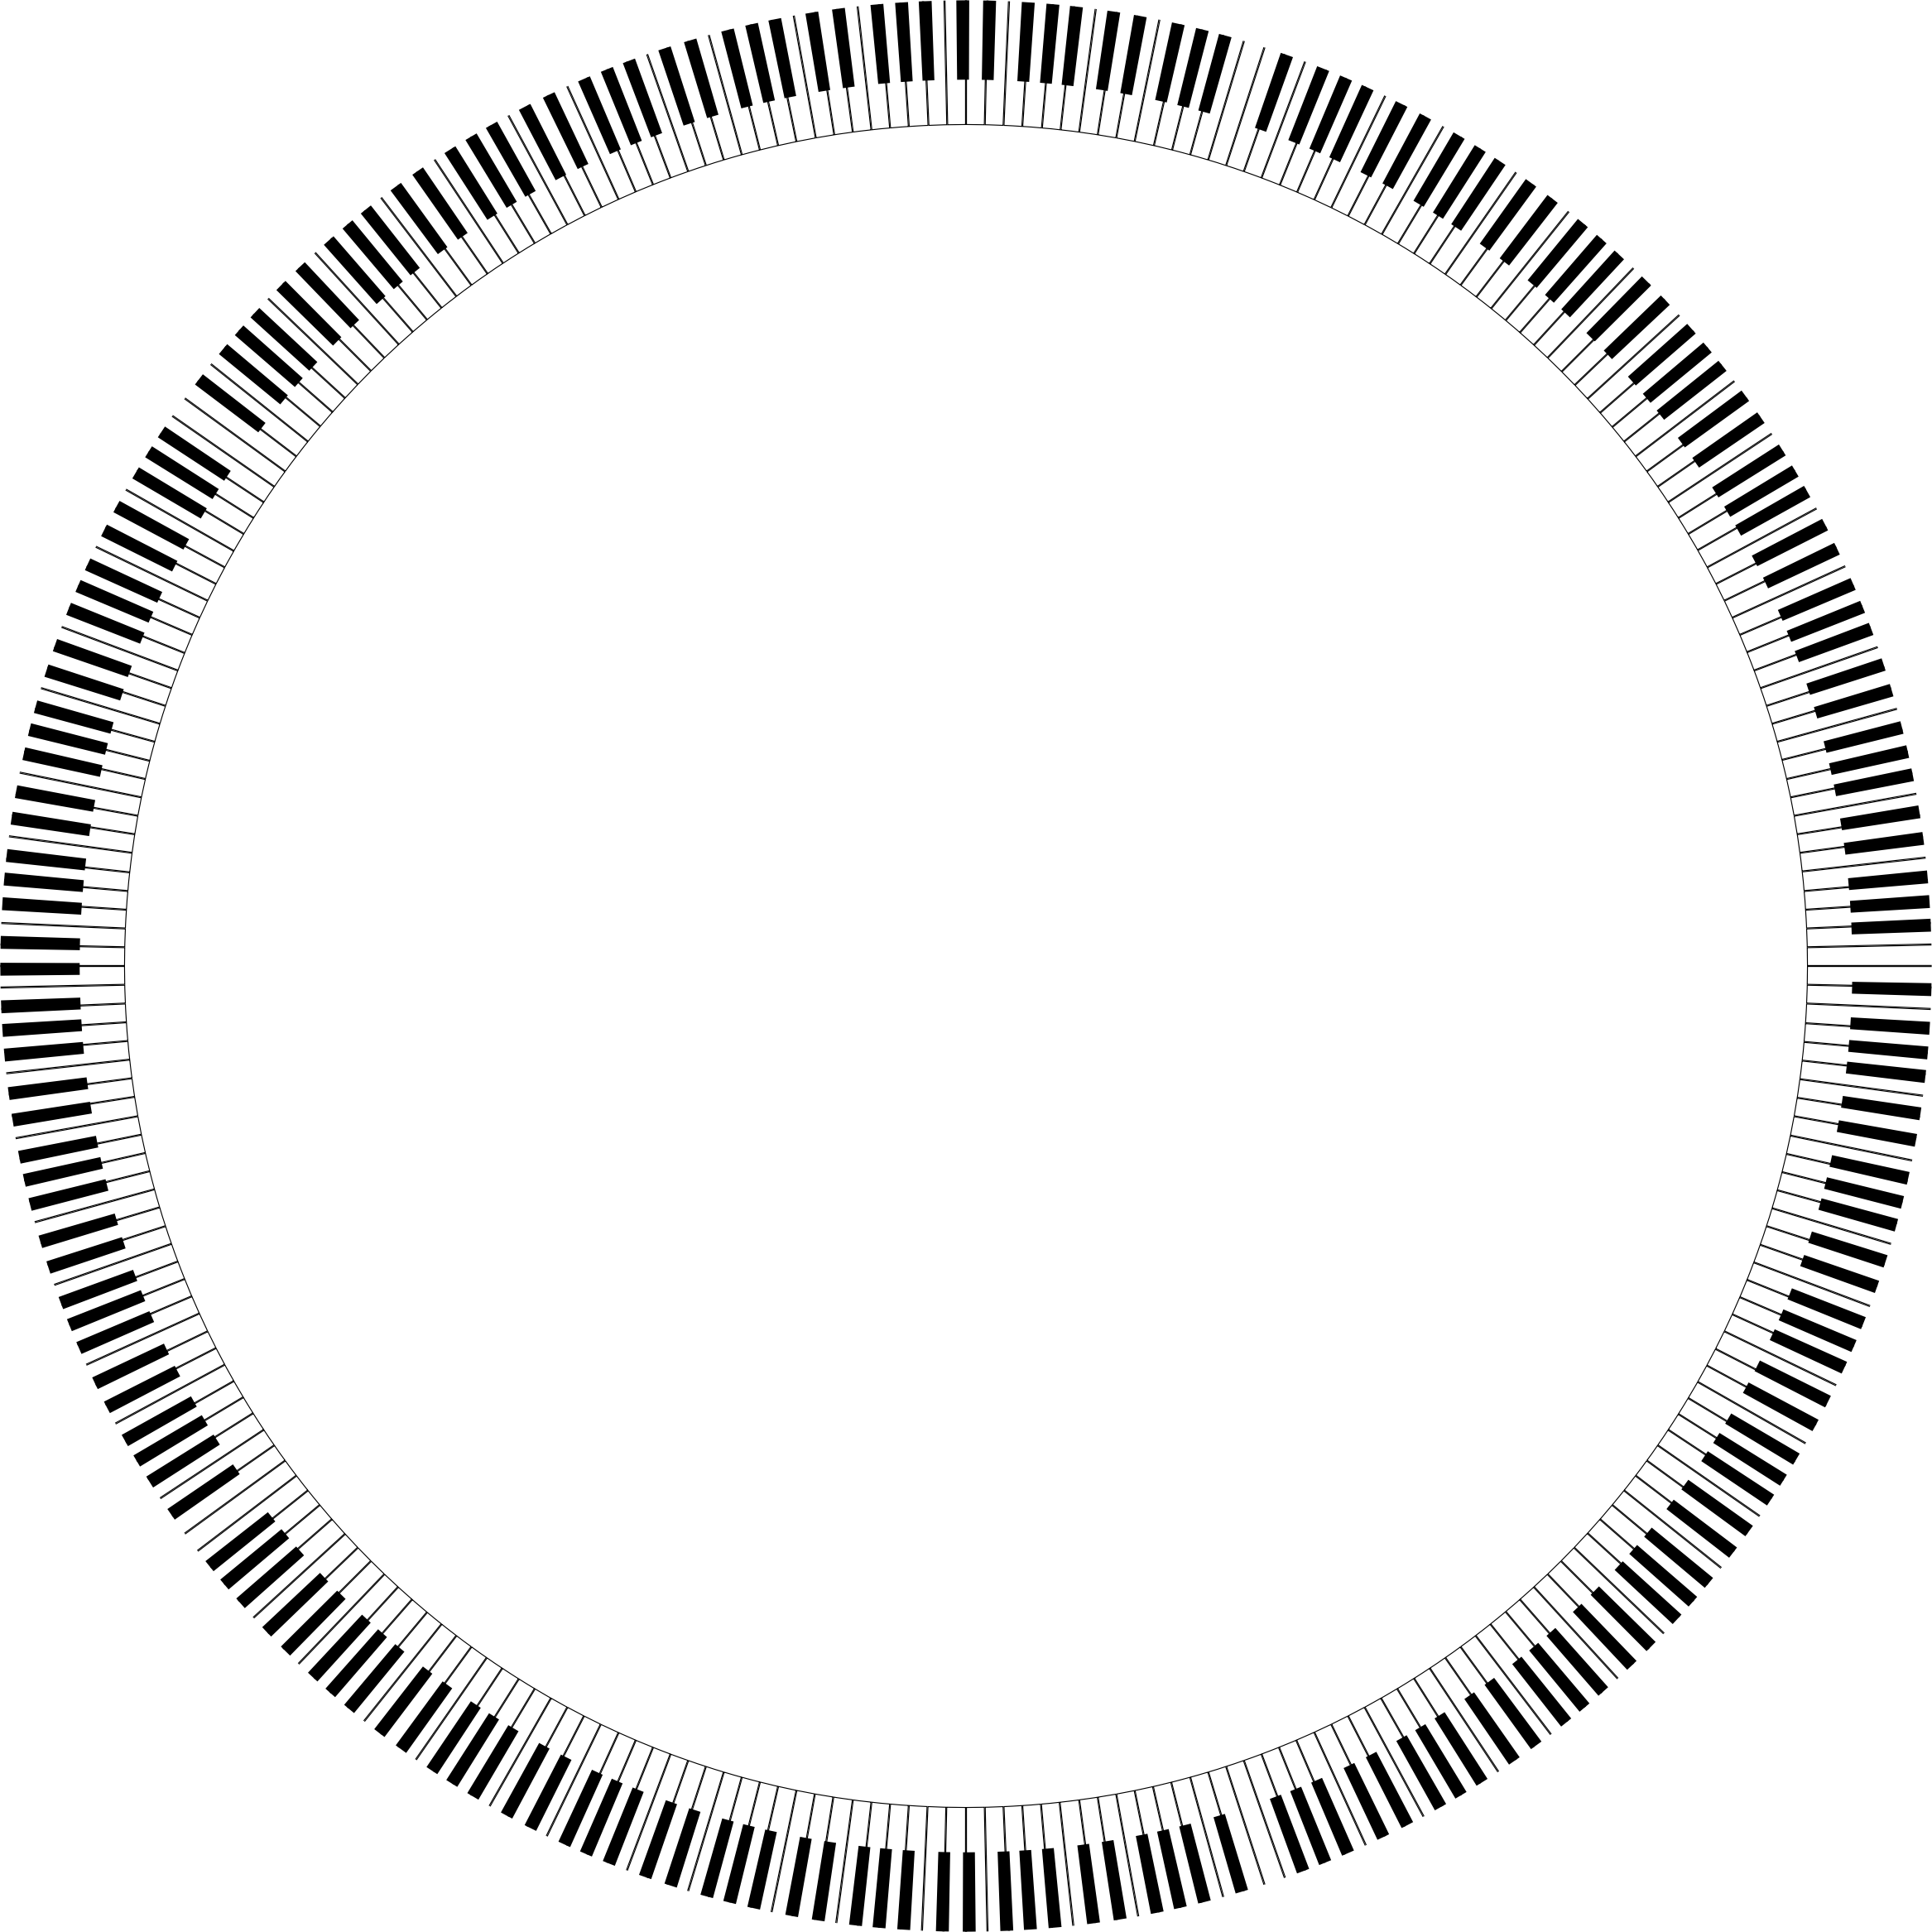 This Free Icons Png Design Of Piano Keys Circle - Round Tire Vector Hd Clipart (2334x2334), Png Download